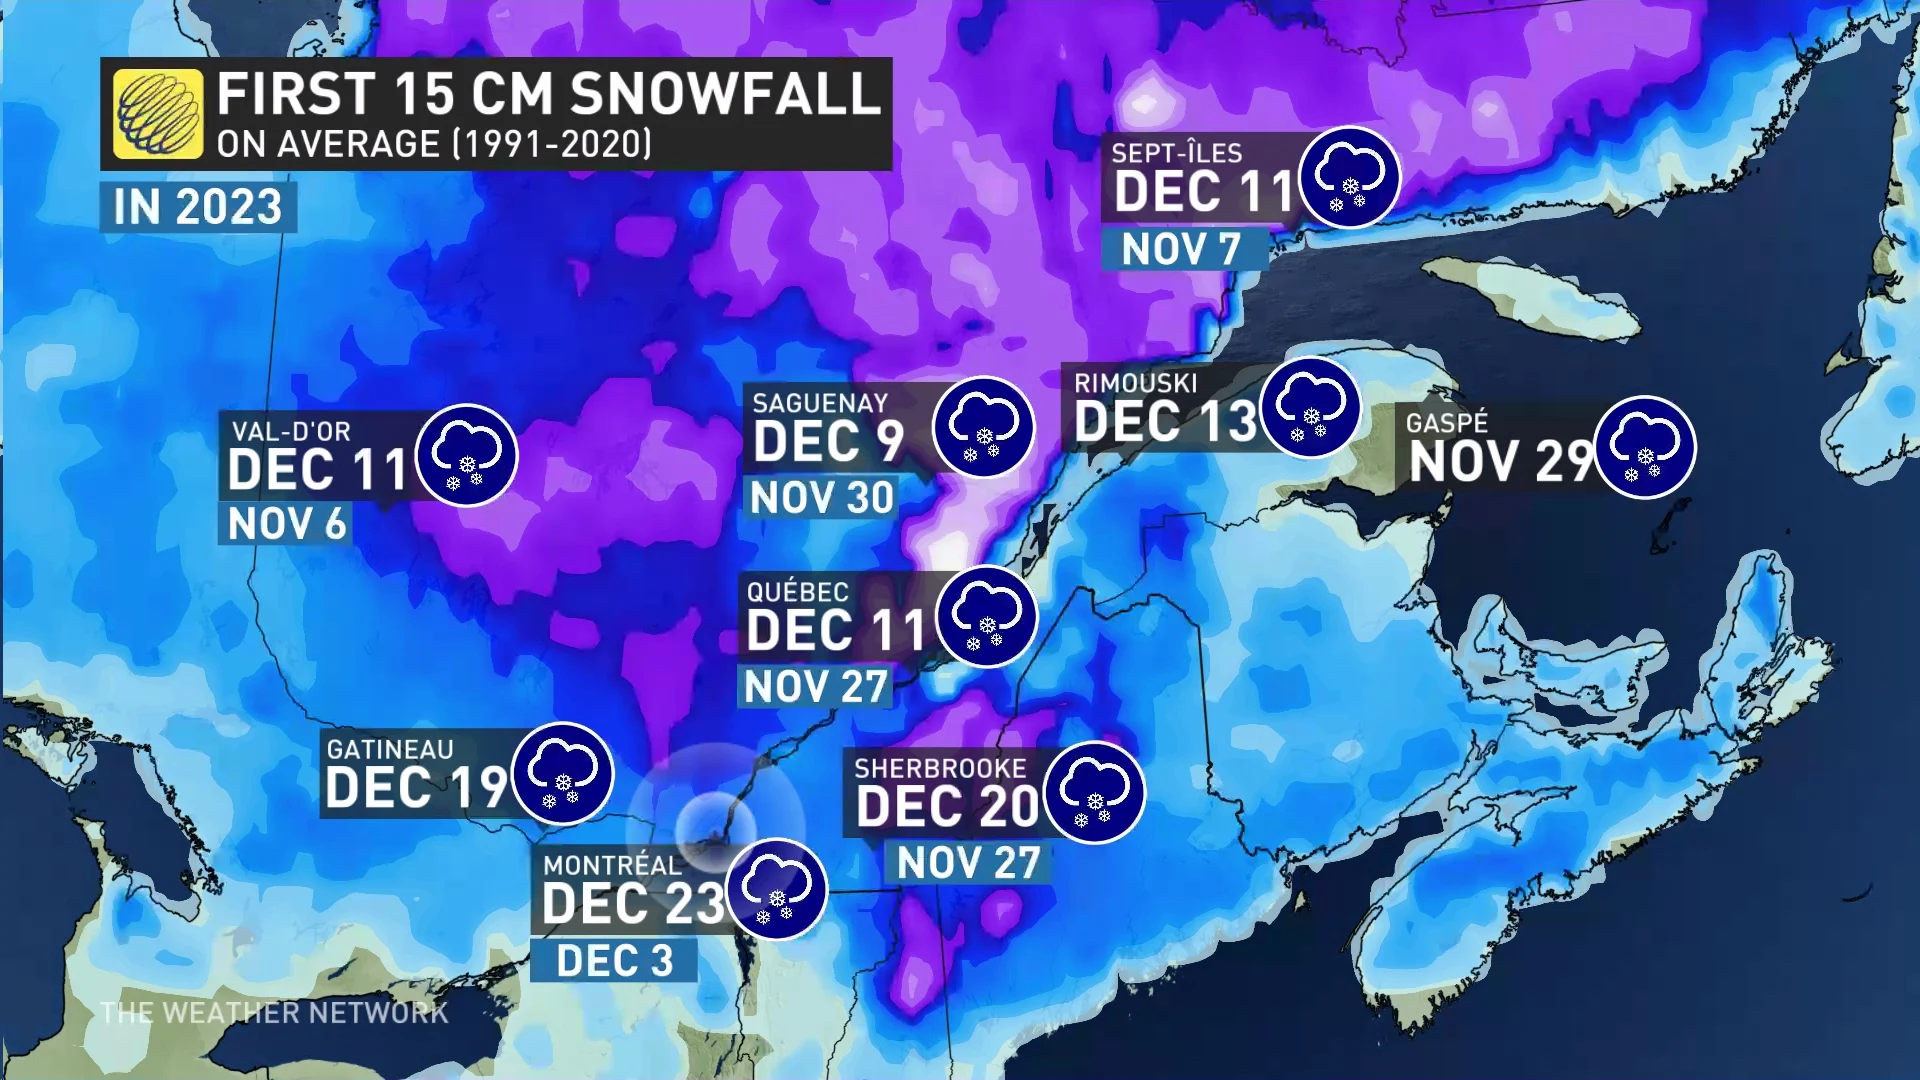 Montreal - first snow average in Quebec